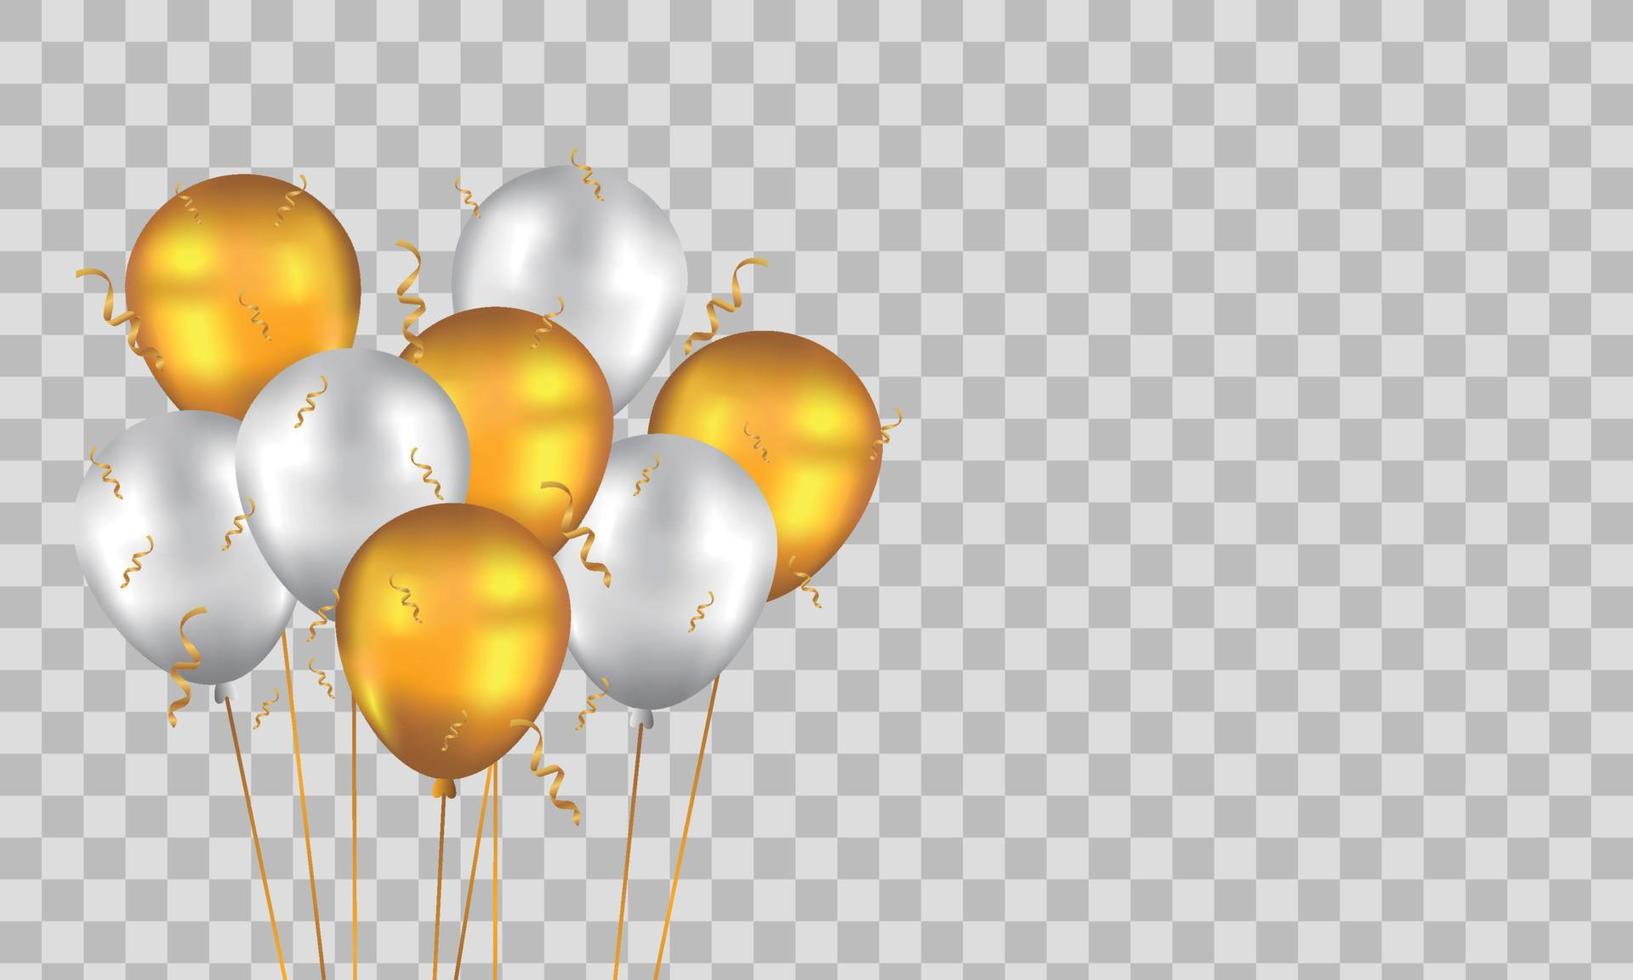 Happy Birthday background with illustrations balloon vector